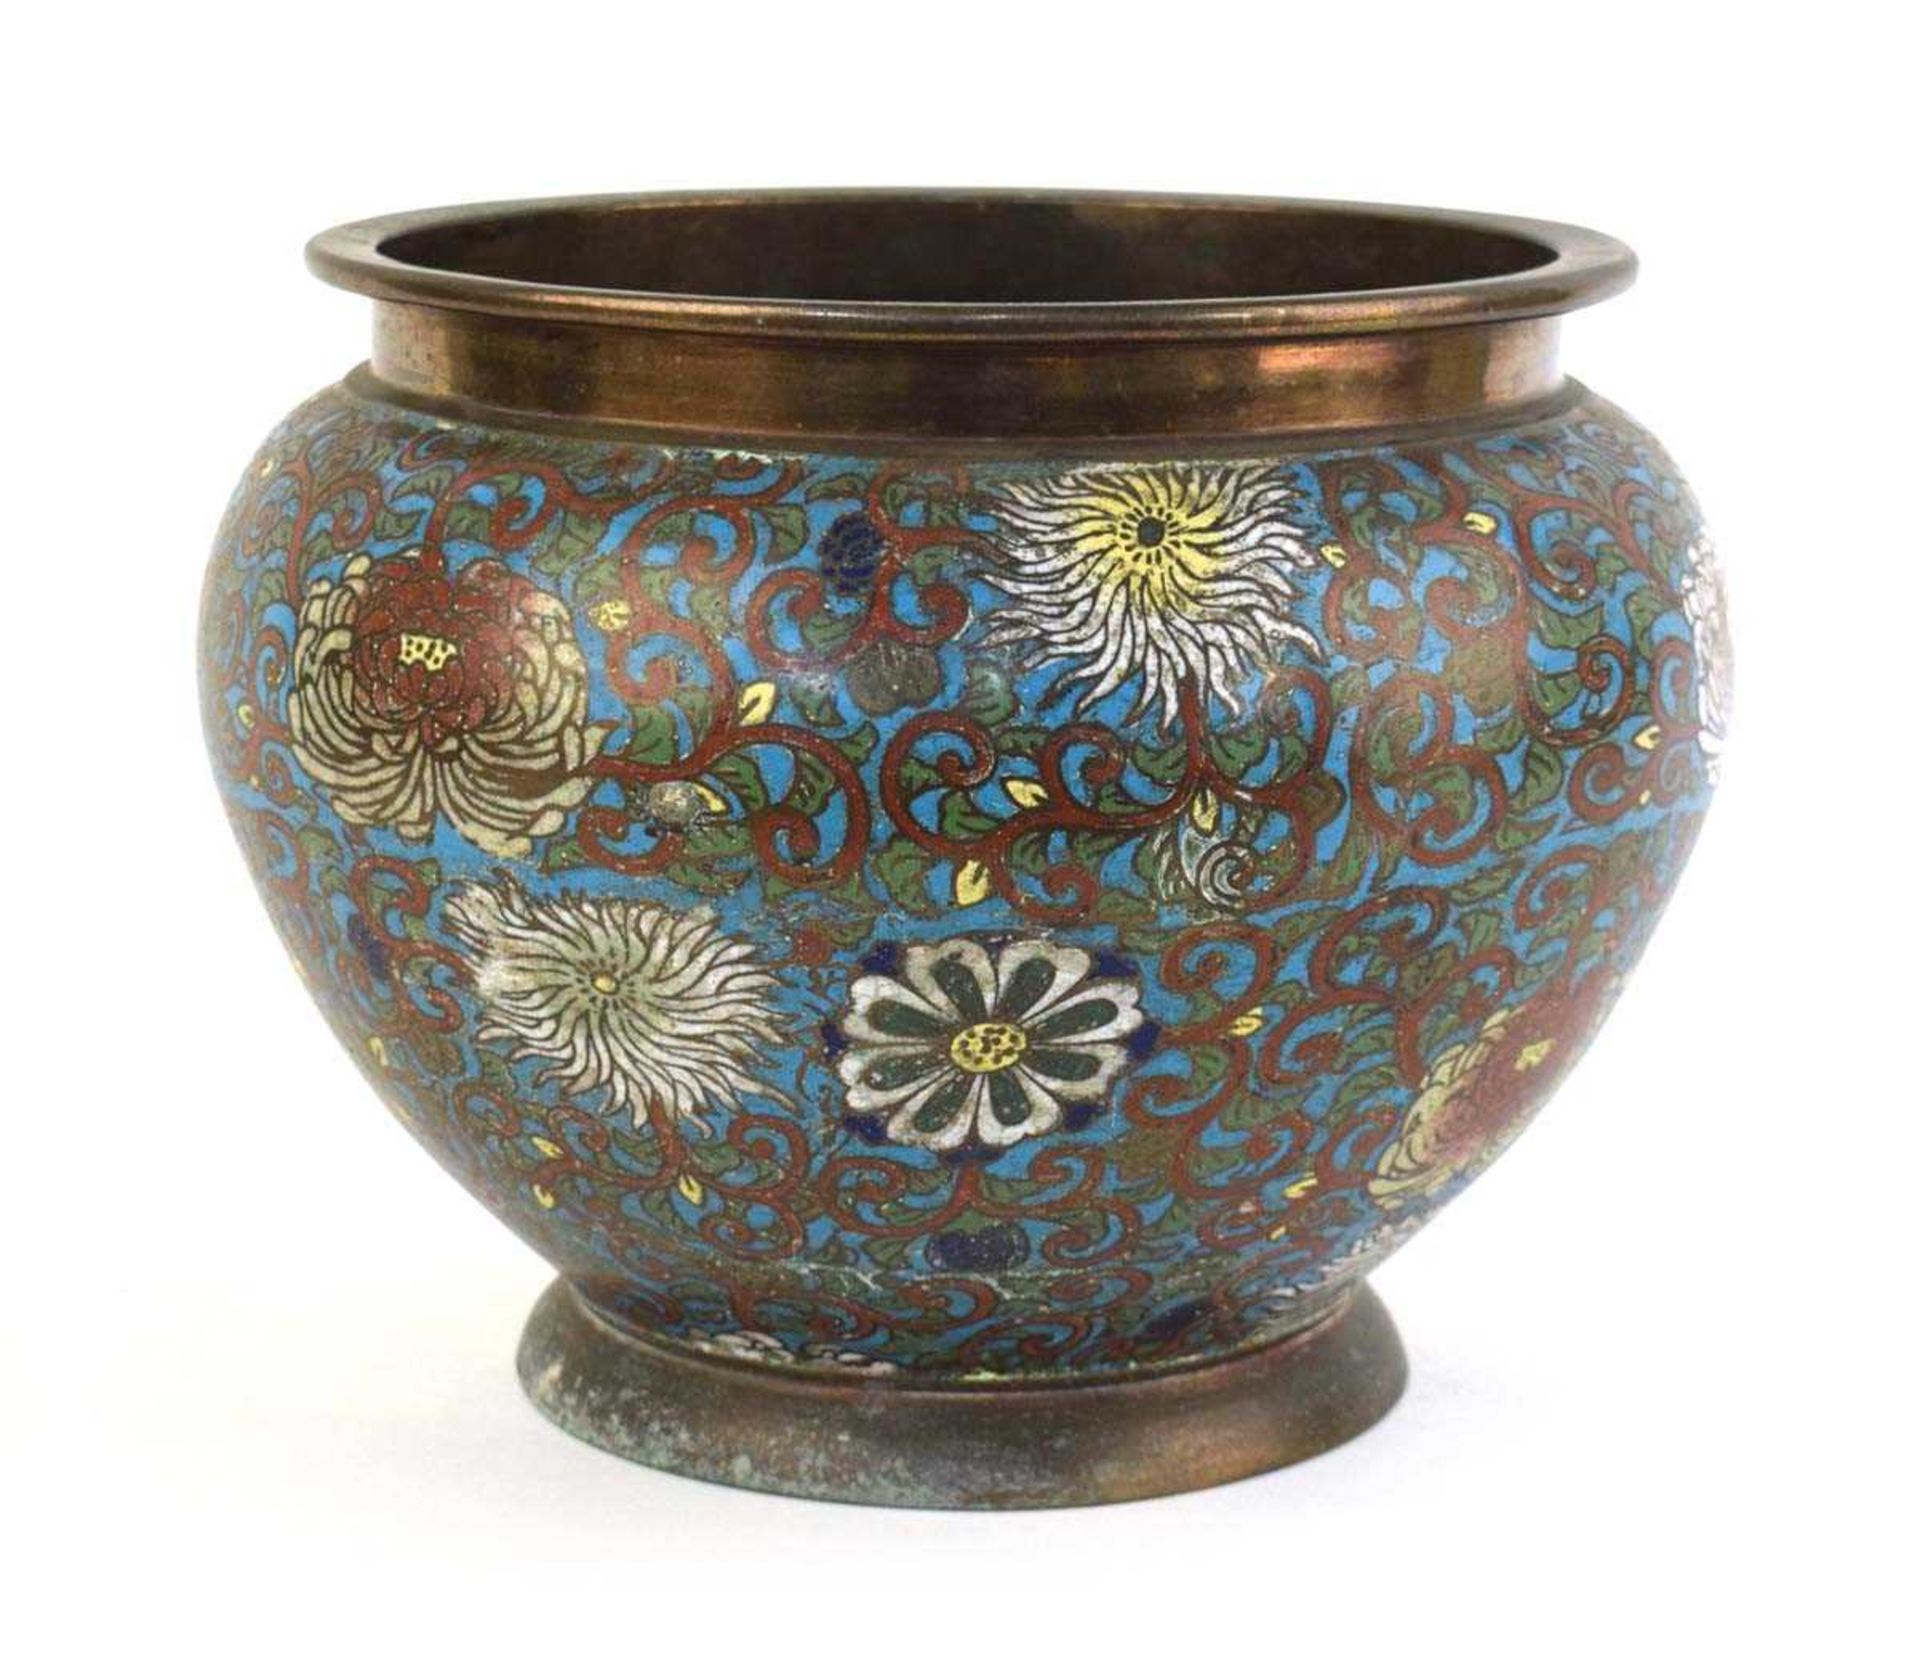 A 19th century Chinese cloisonné enamel jardinière of squat baluster form decorated with